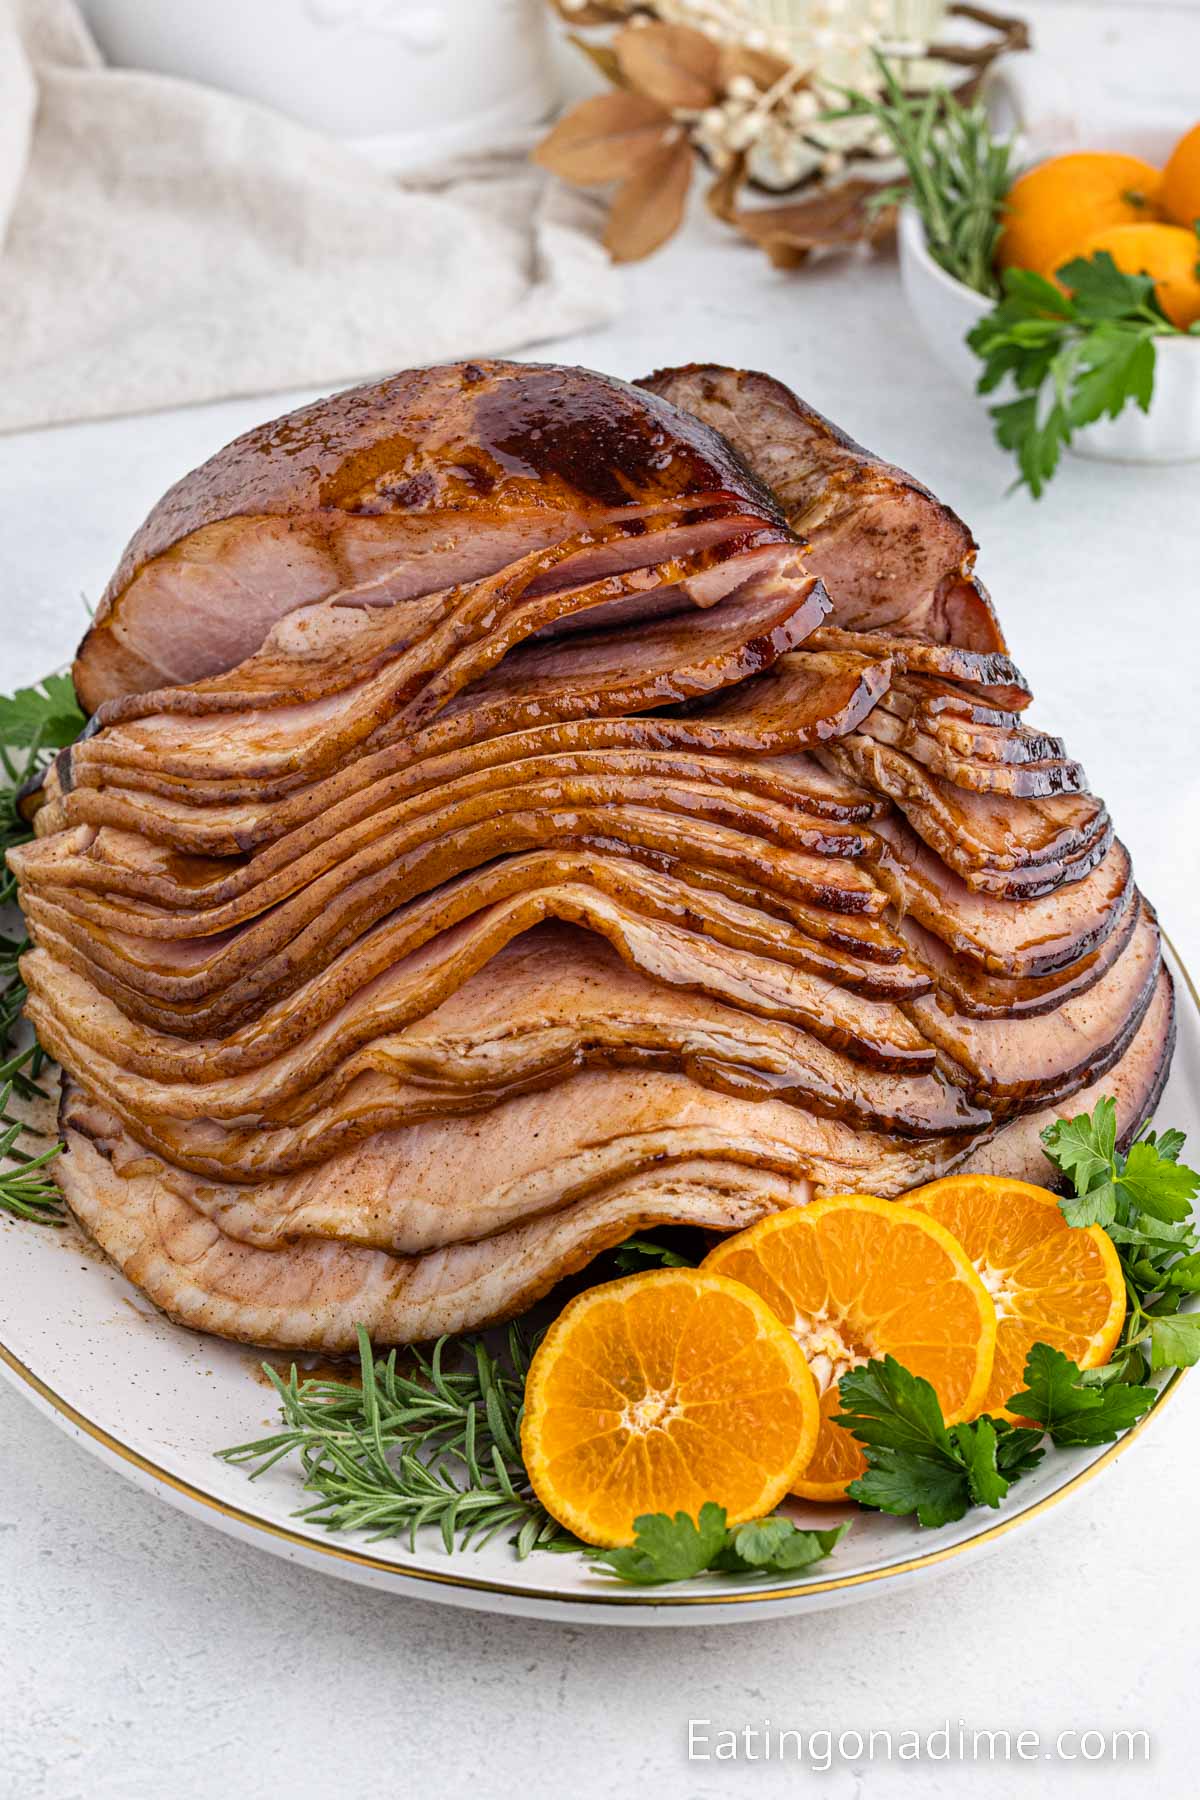 How to Cook a Spiral Ham  Sunny's Easy Holiday Spiral Ham Recipe